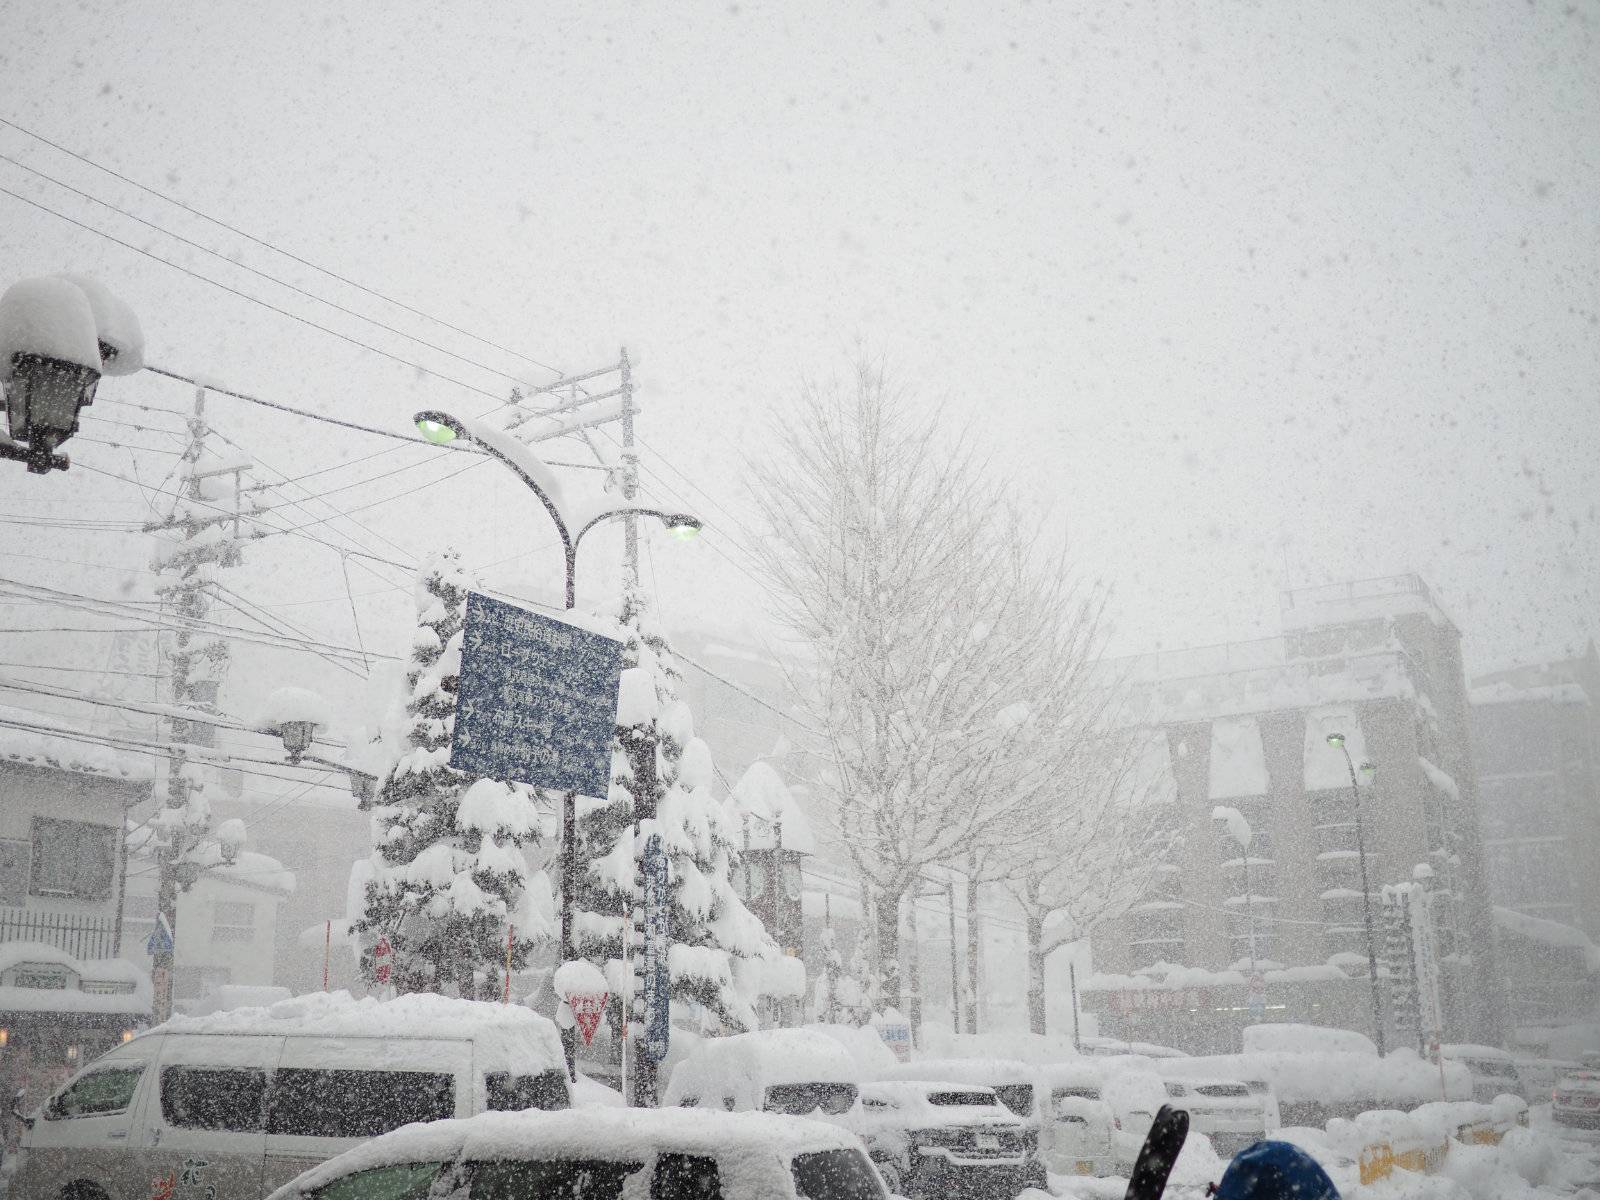 Heavy snow fall outside the station